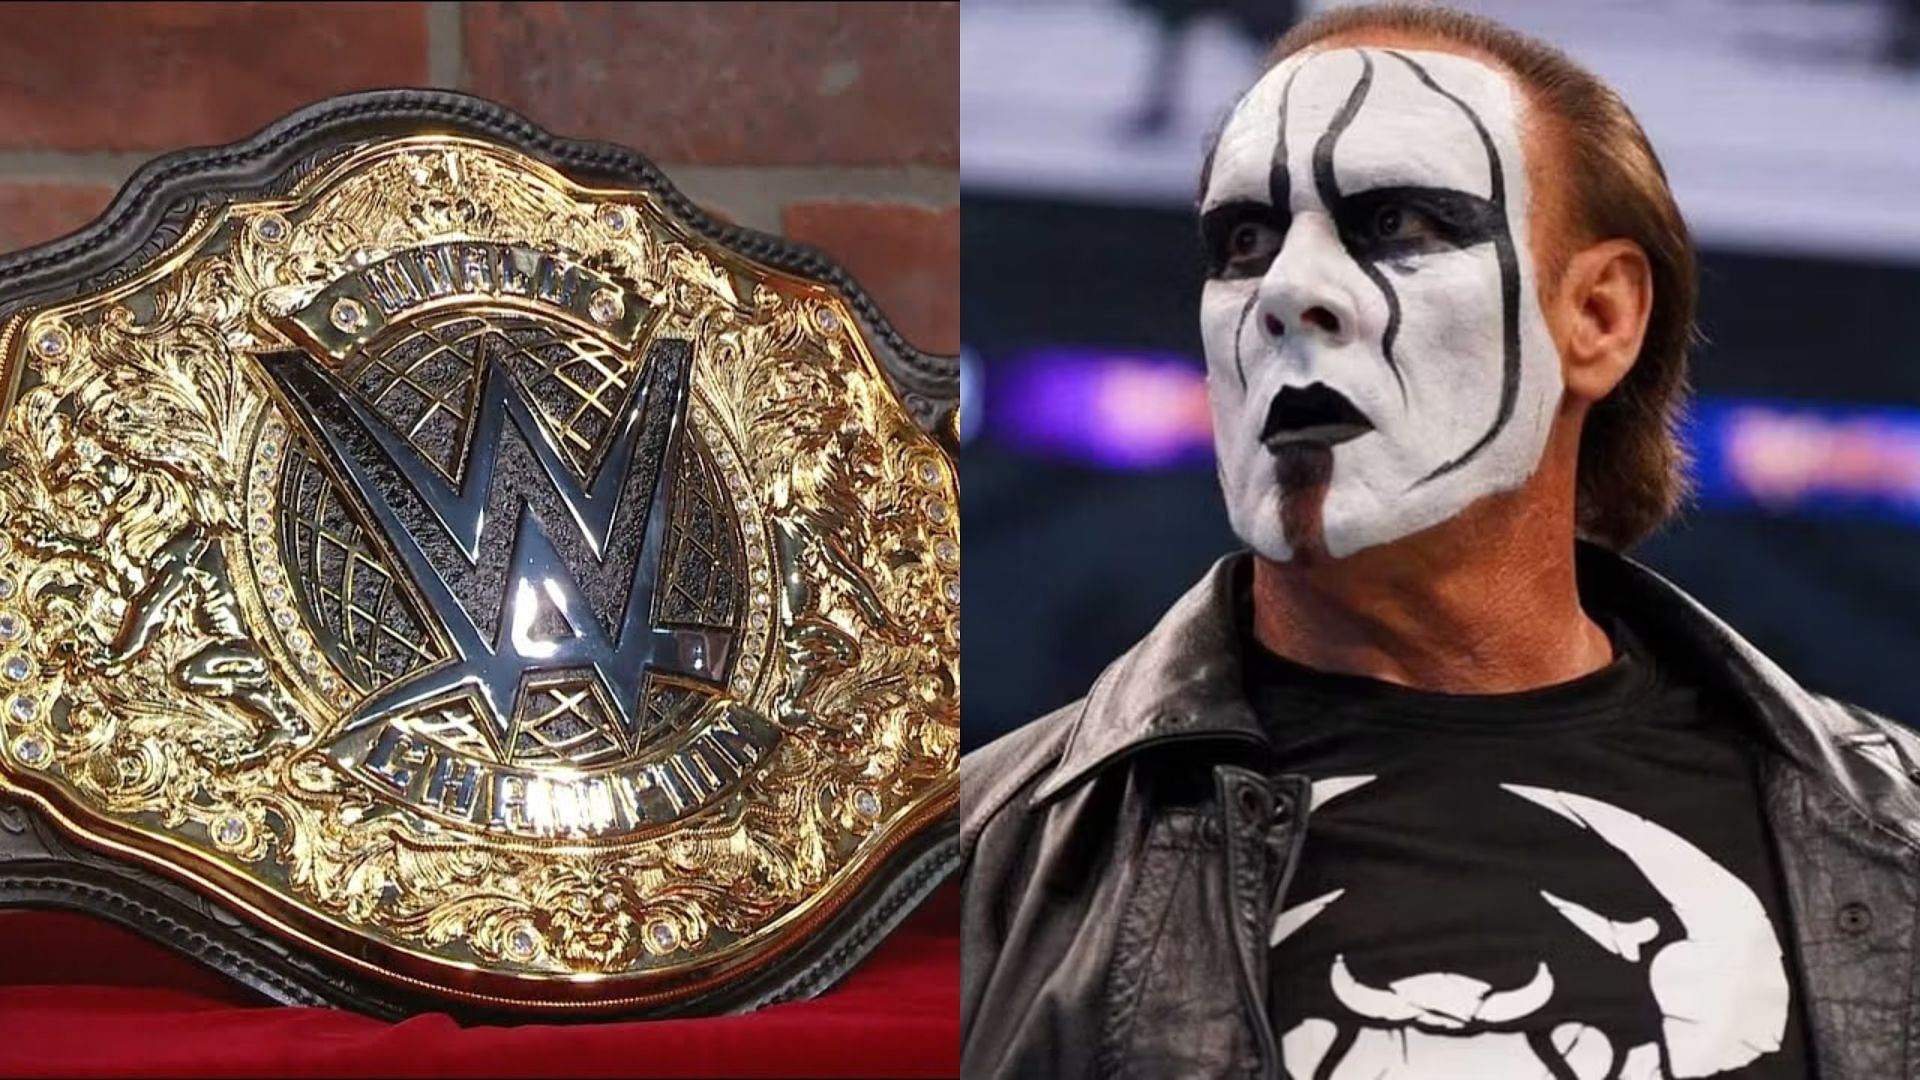 Sting recently announced when his last match would be